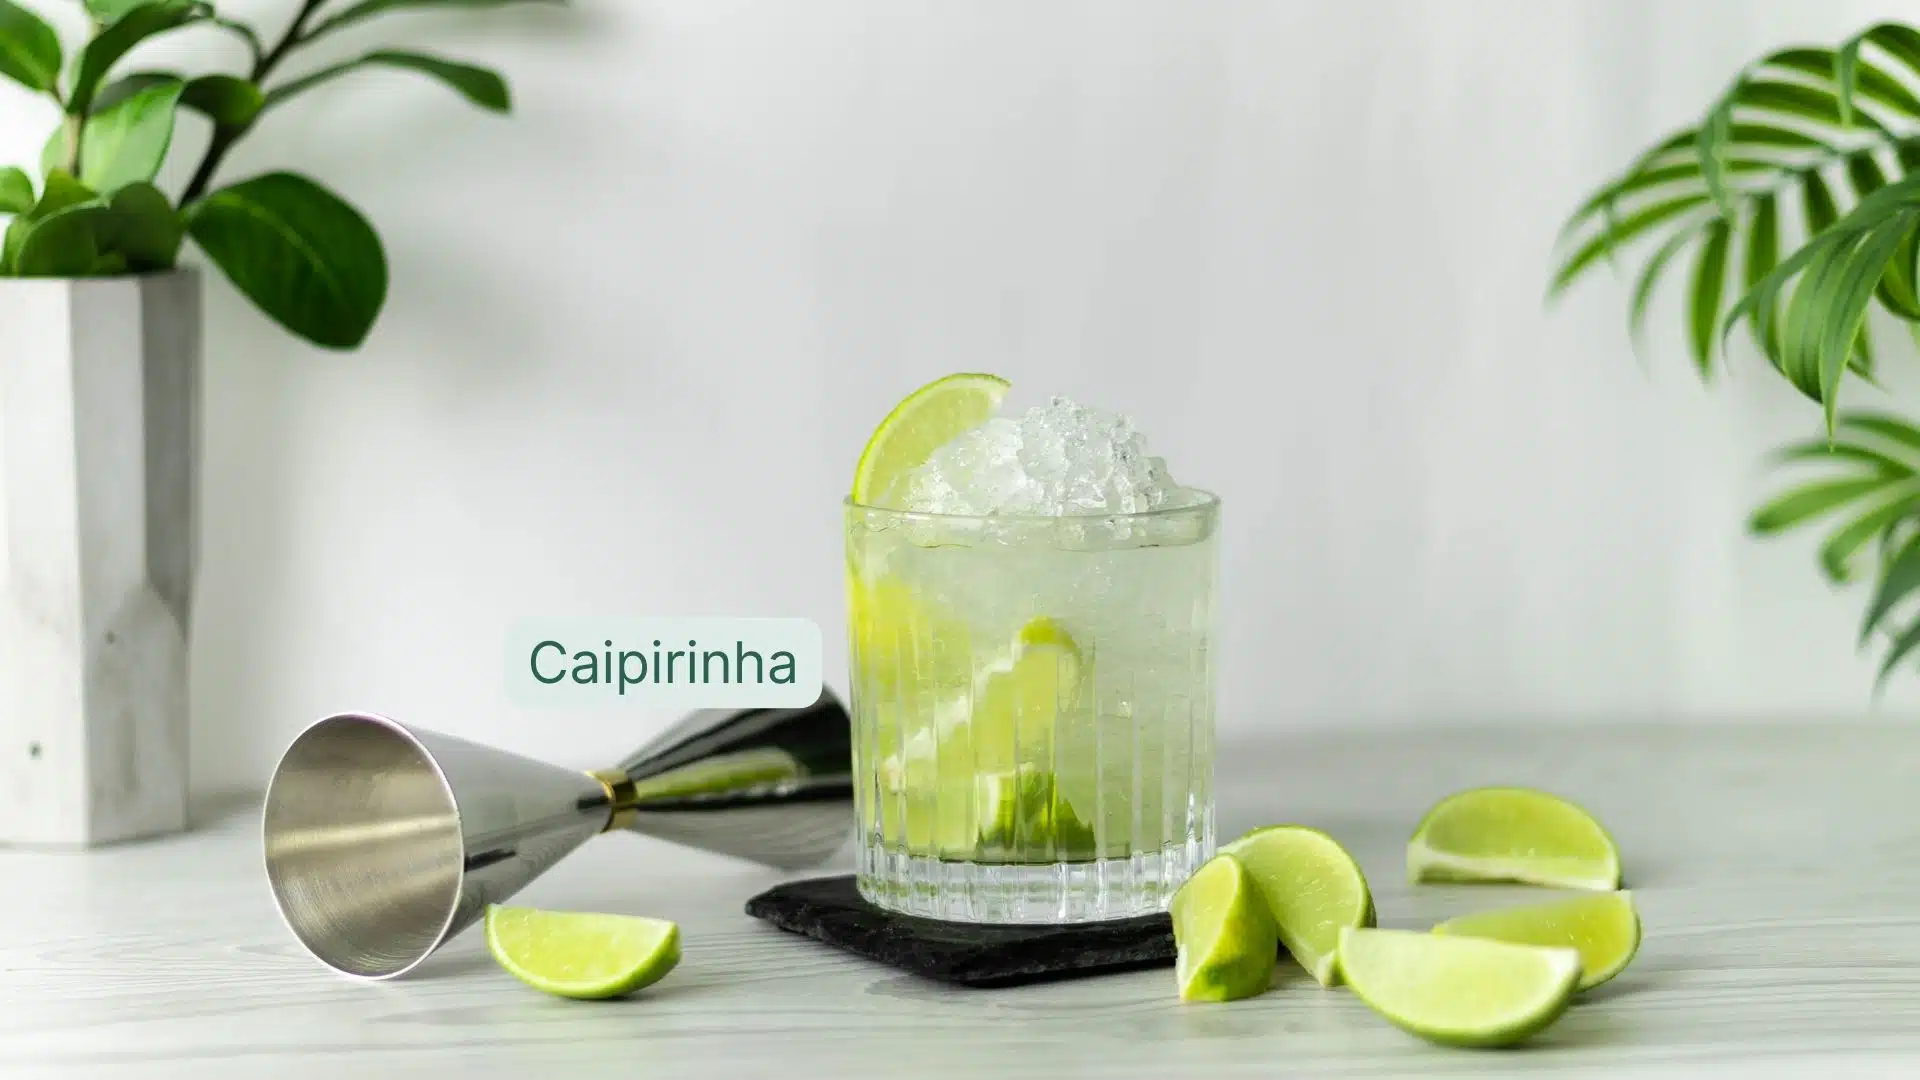 Caipirinha cocktail on black placeholder with fresh lime slices and a jigger around